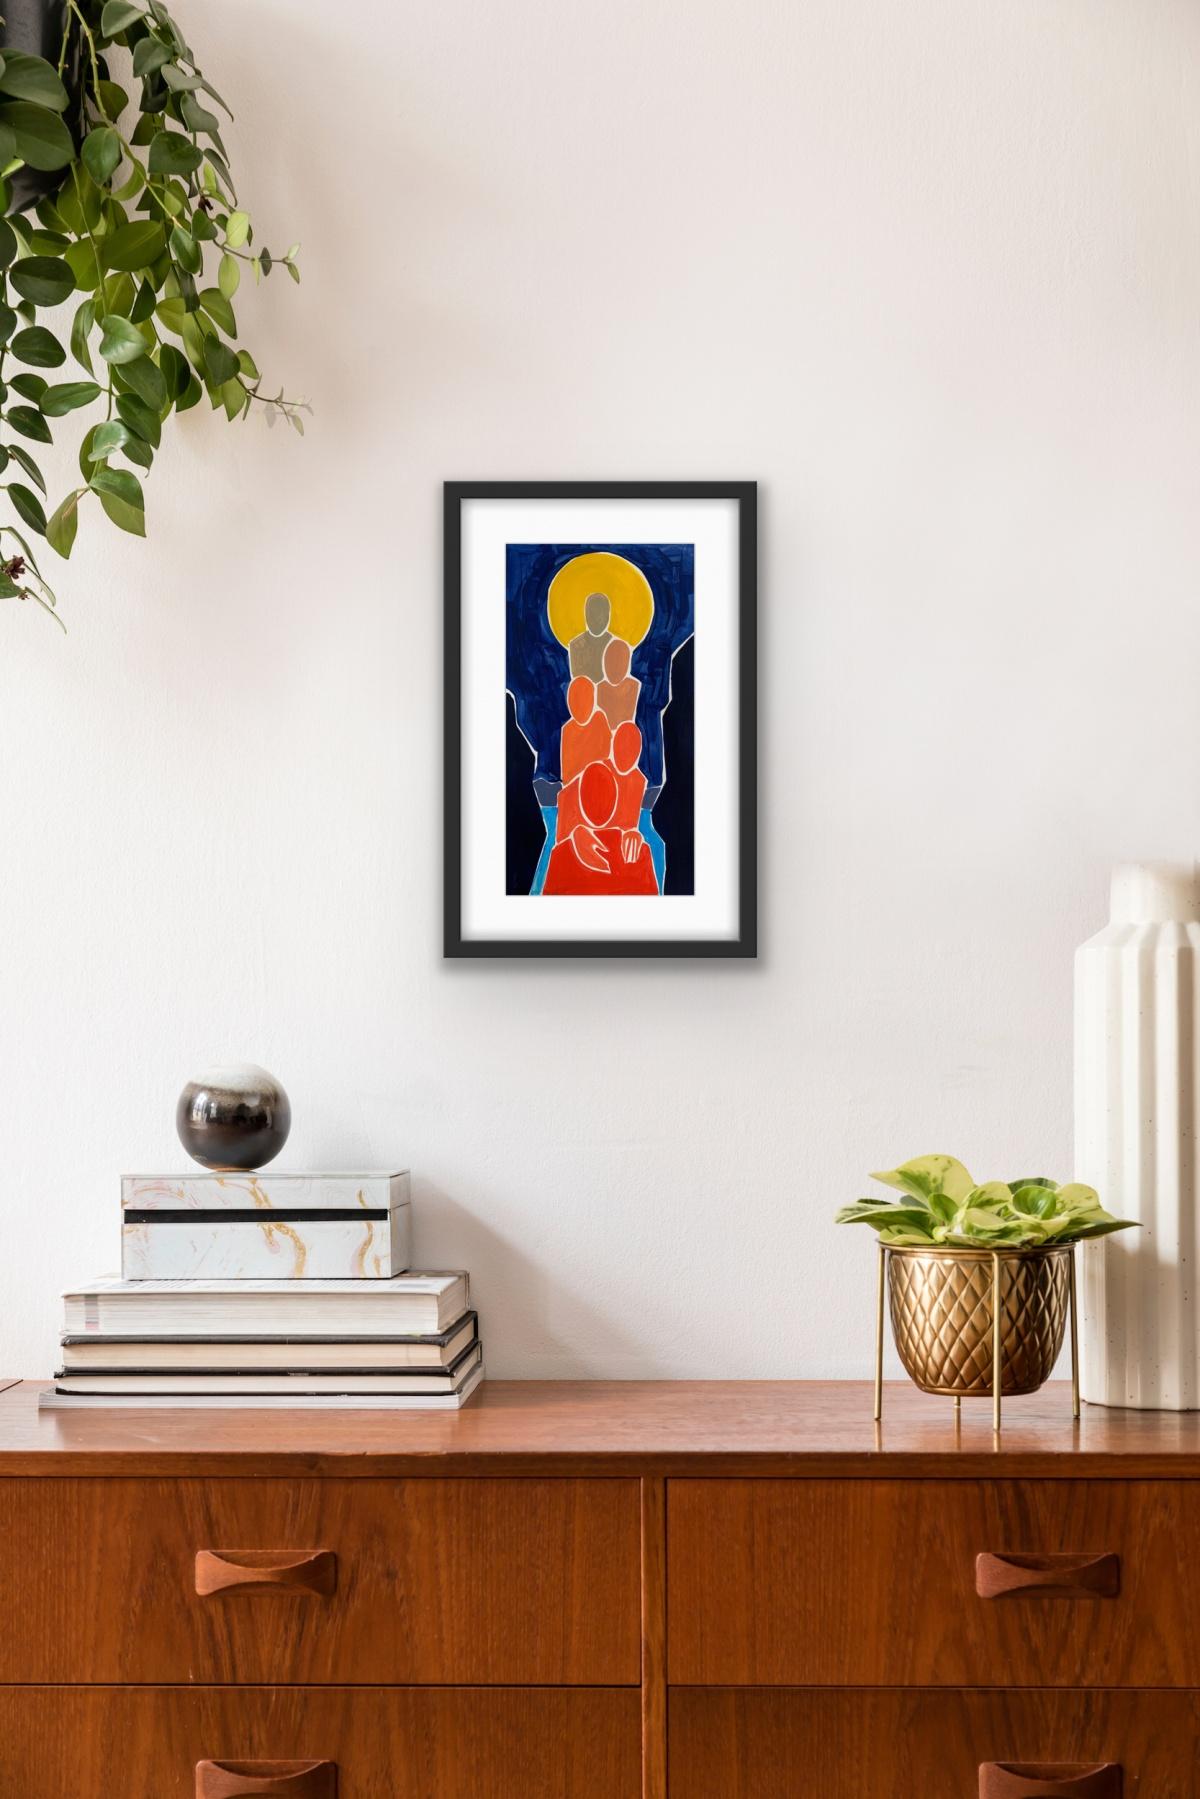 Full moon - Figurative Painting on Paper, Young art, Colorful, Vibrant For Sale 4